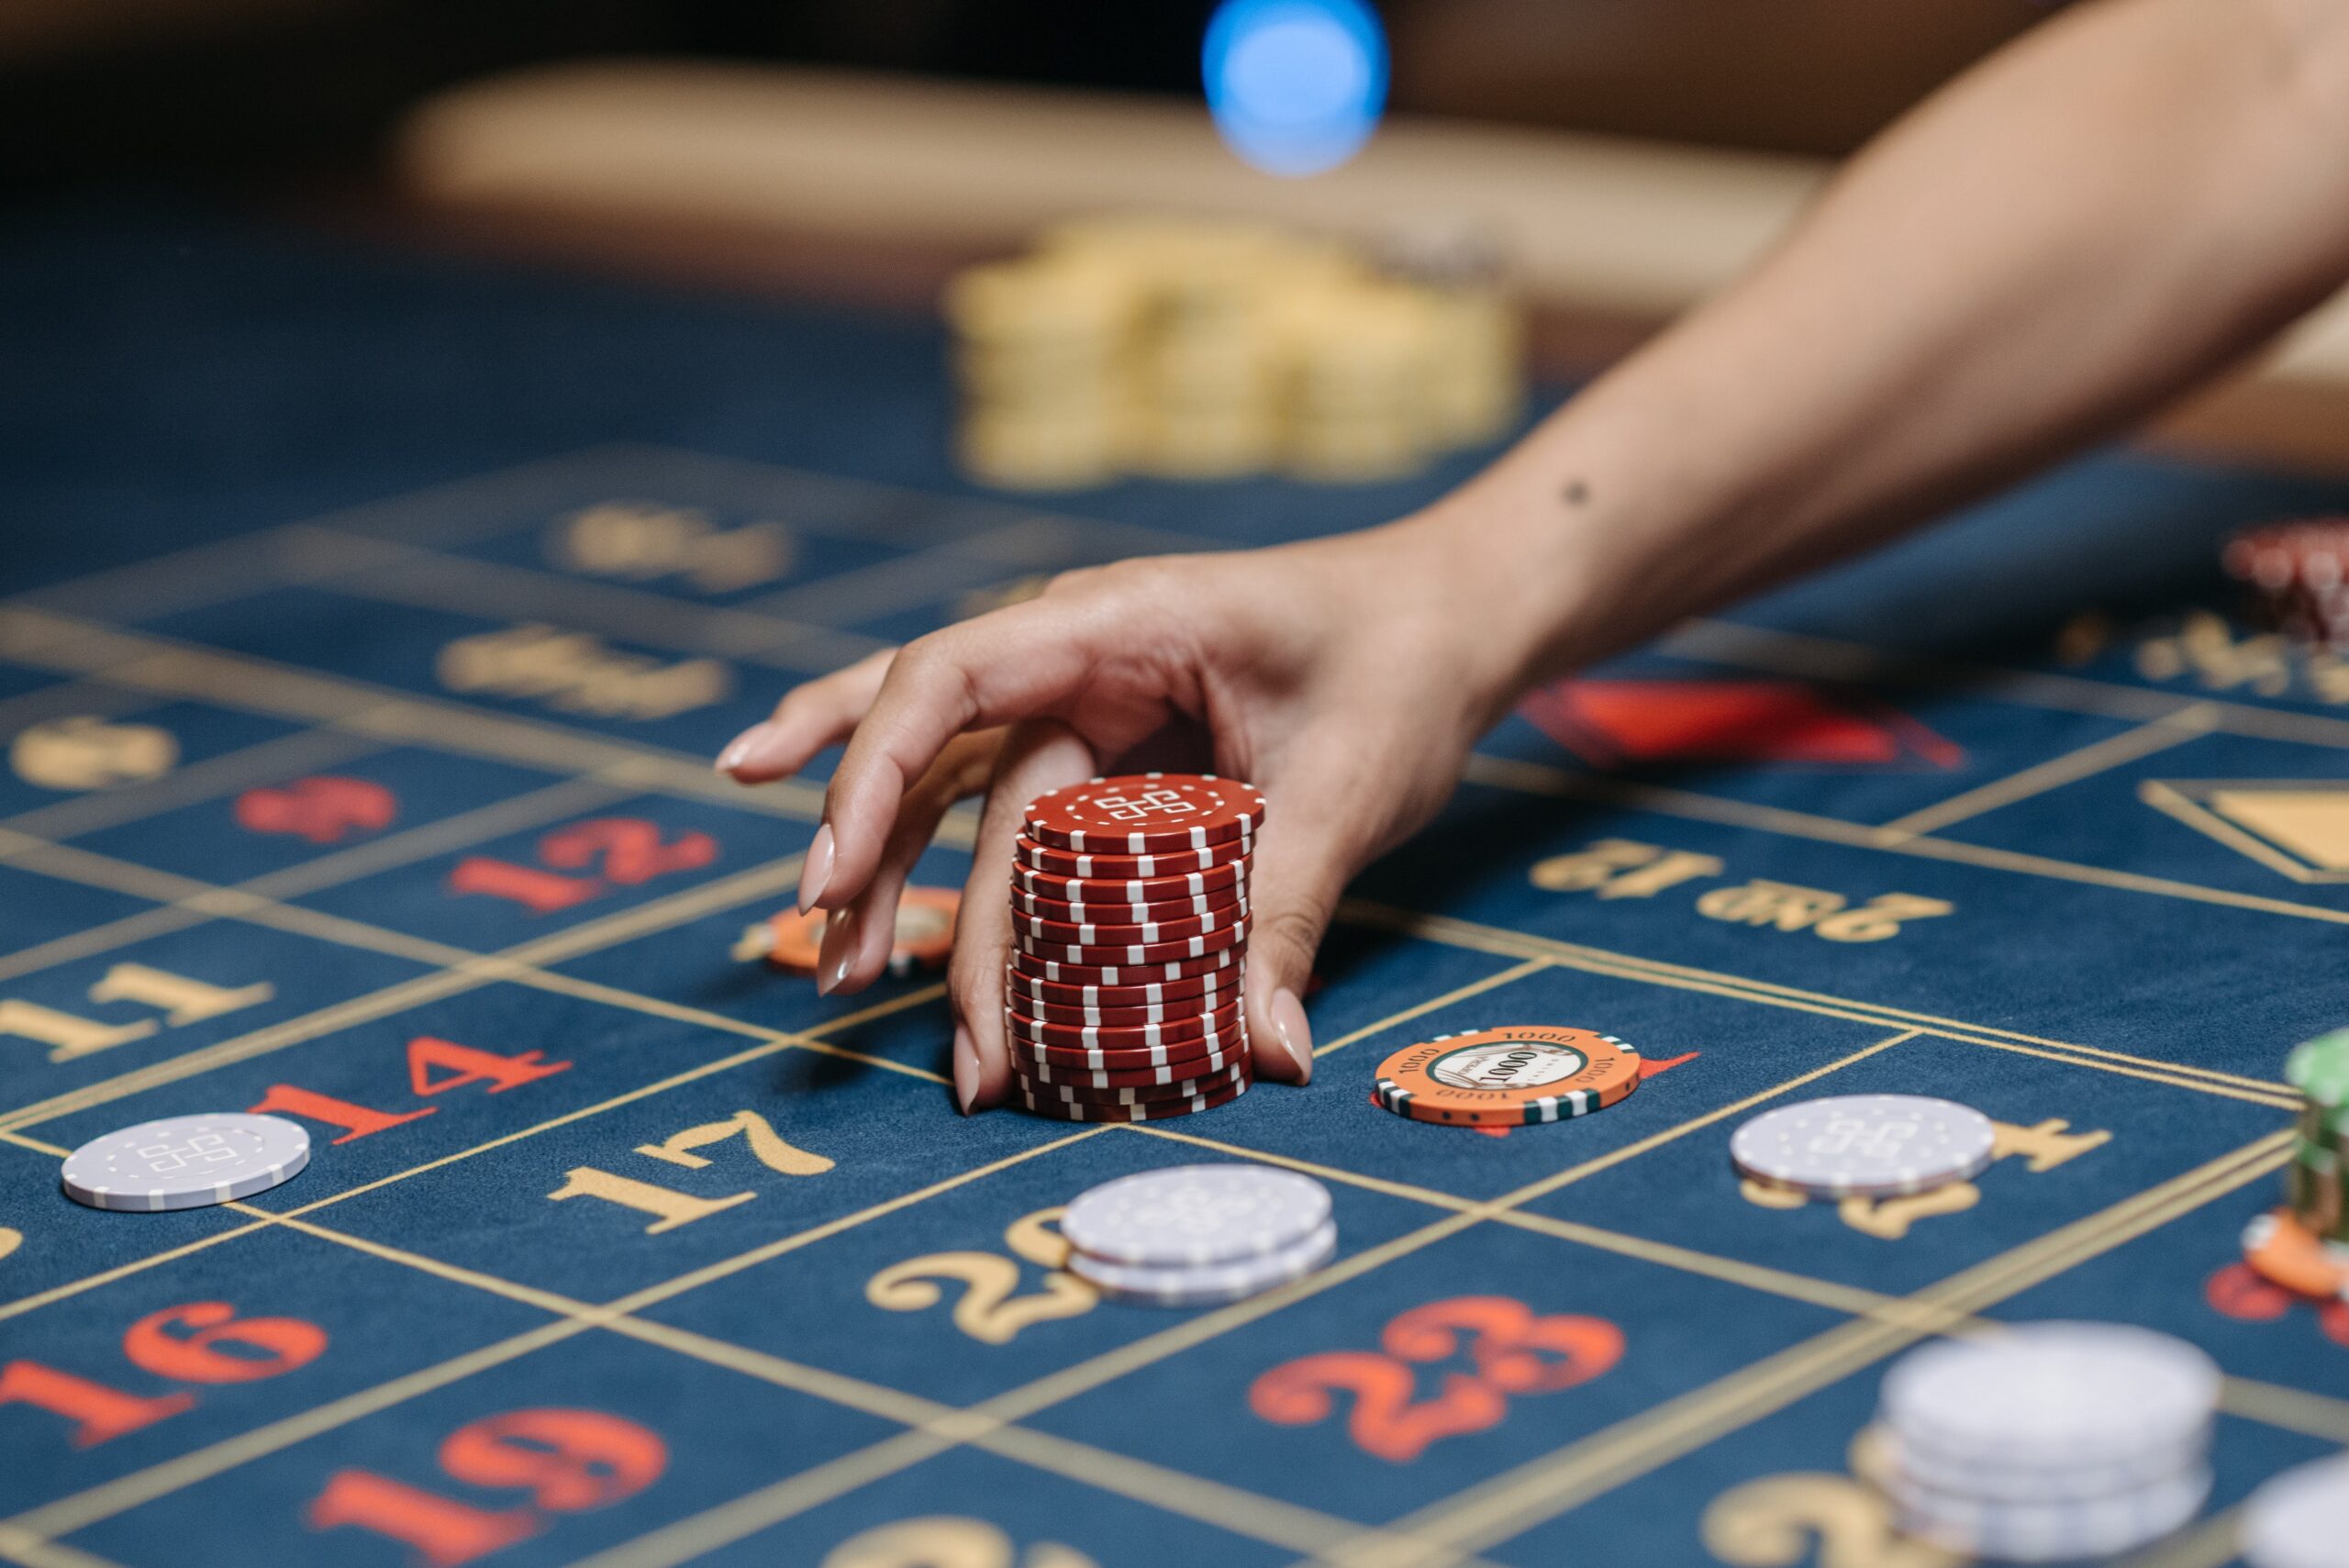 What Are the Best Online Casino Games to Play